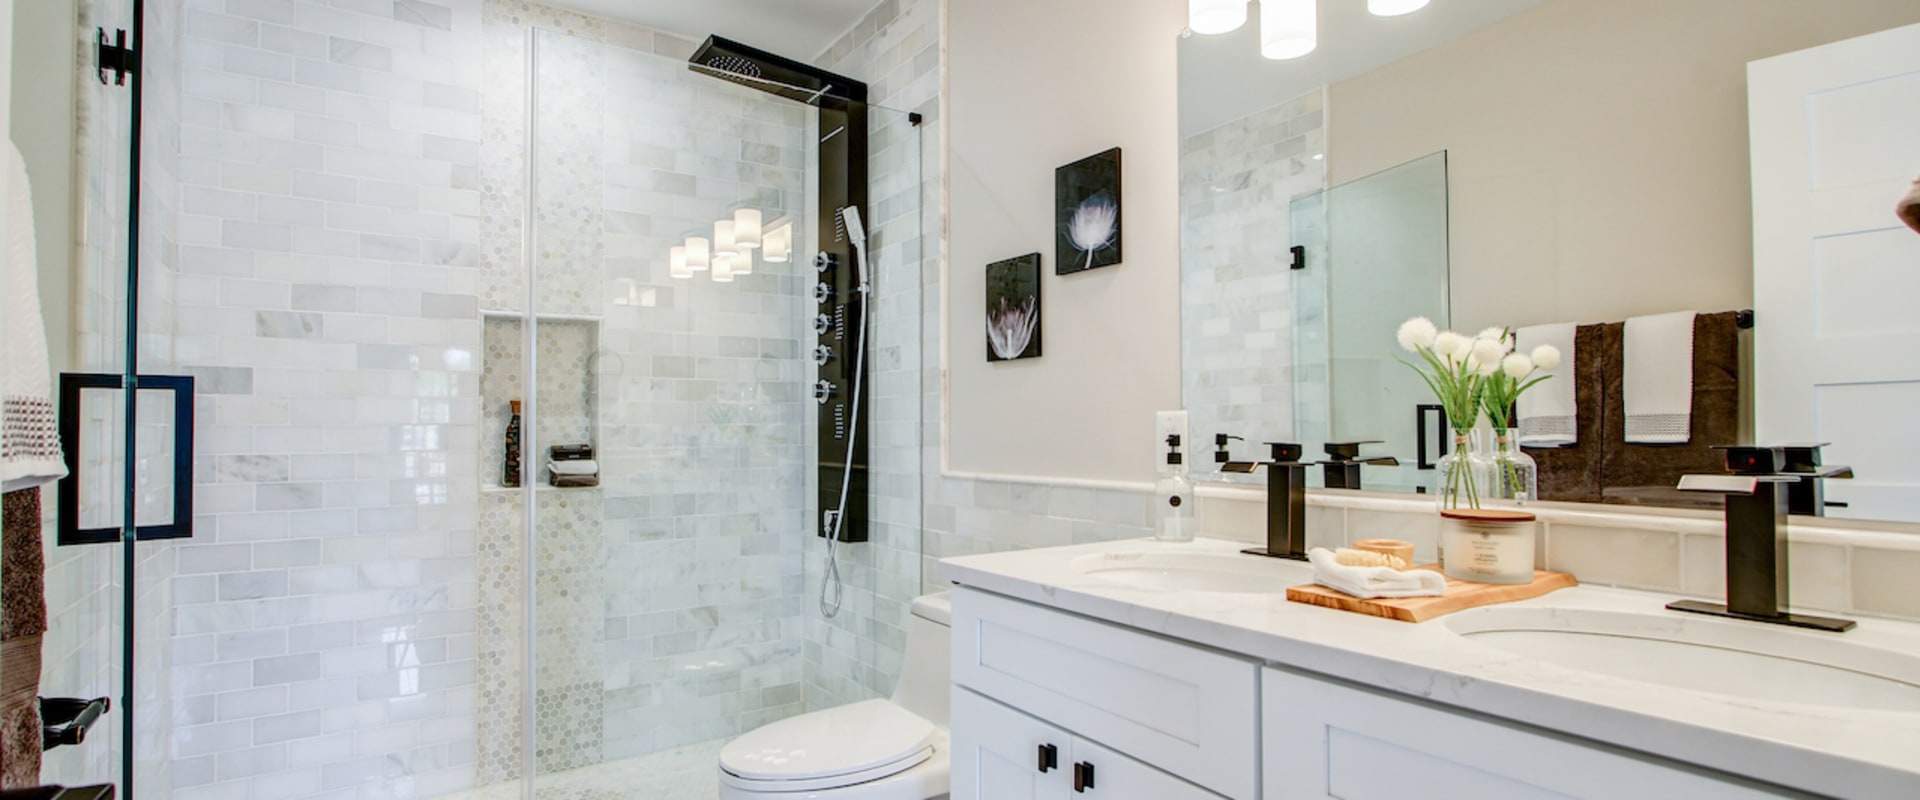 The Ins and Outs of Remodeling a Small Bathroom